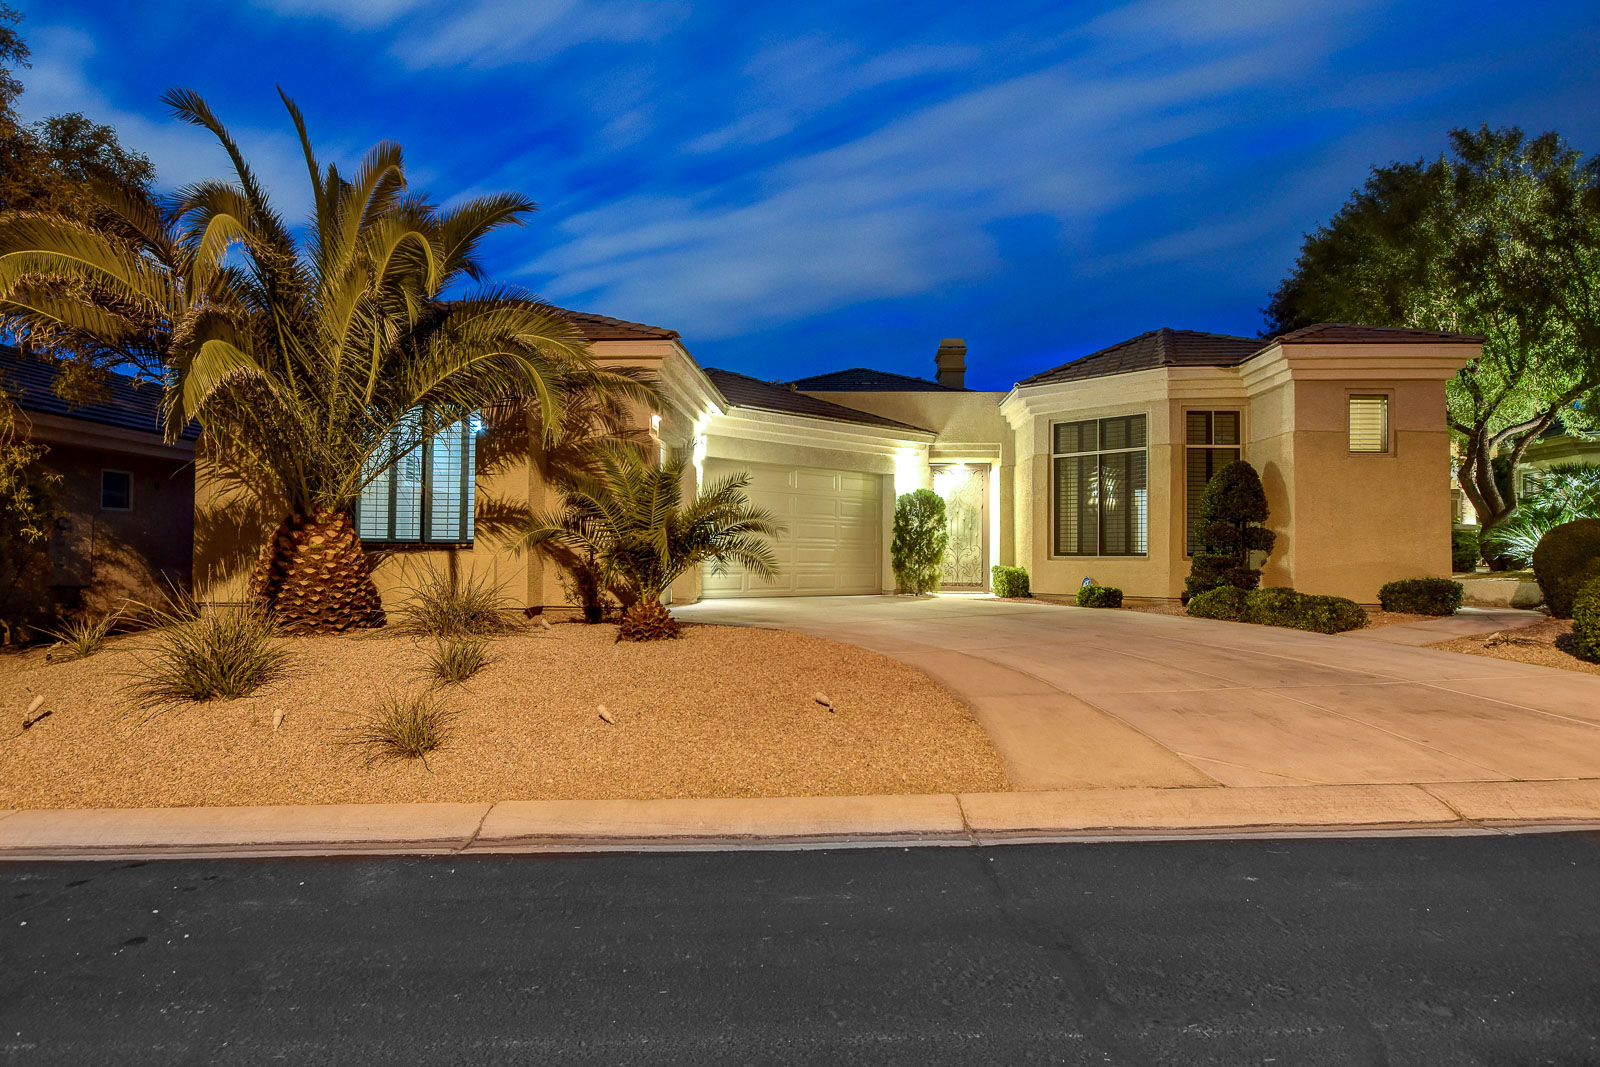 Summerlin Investment Property